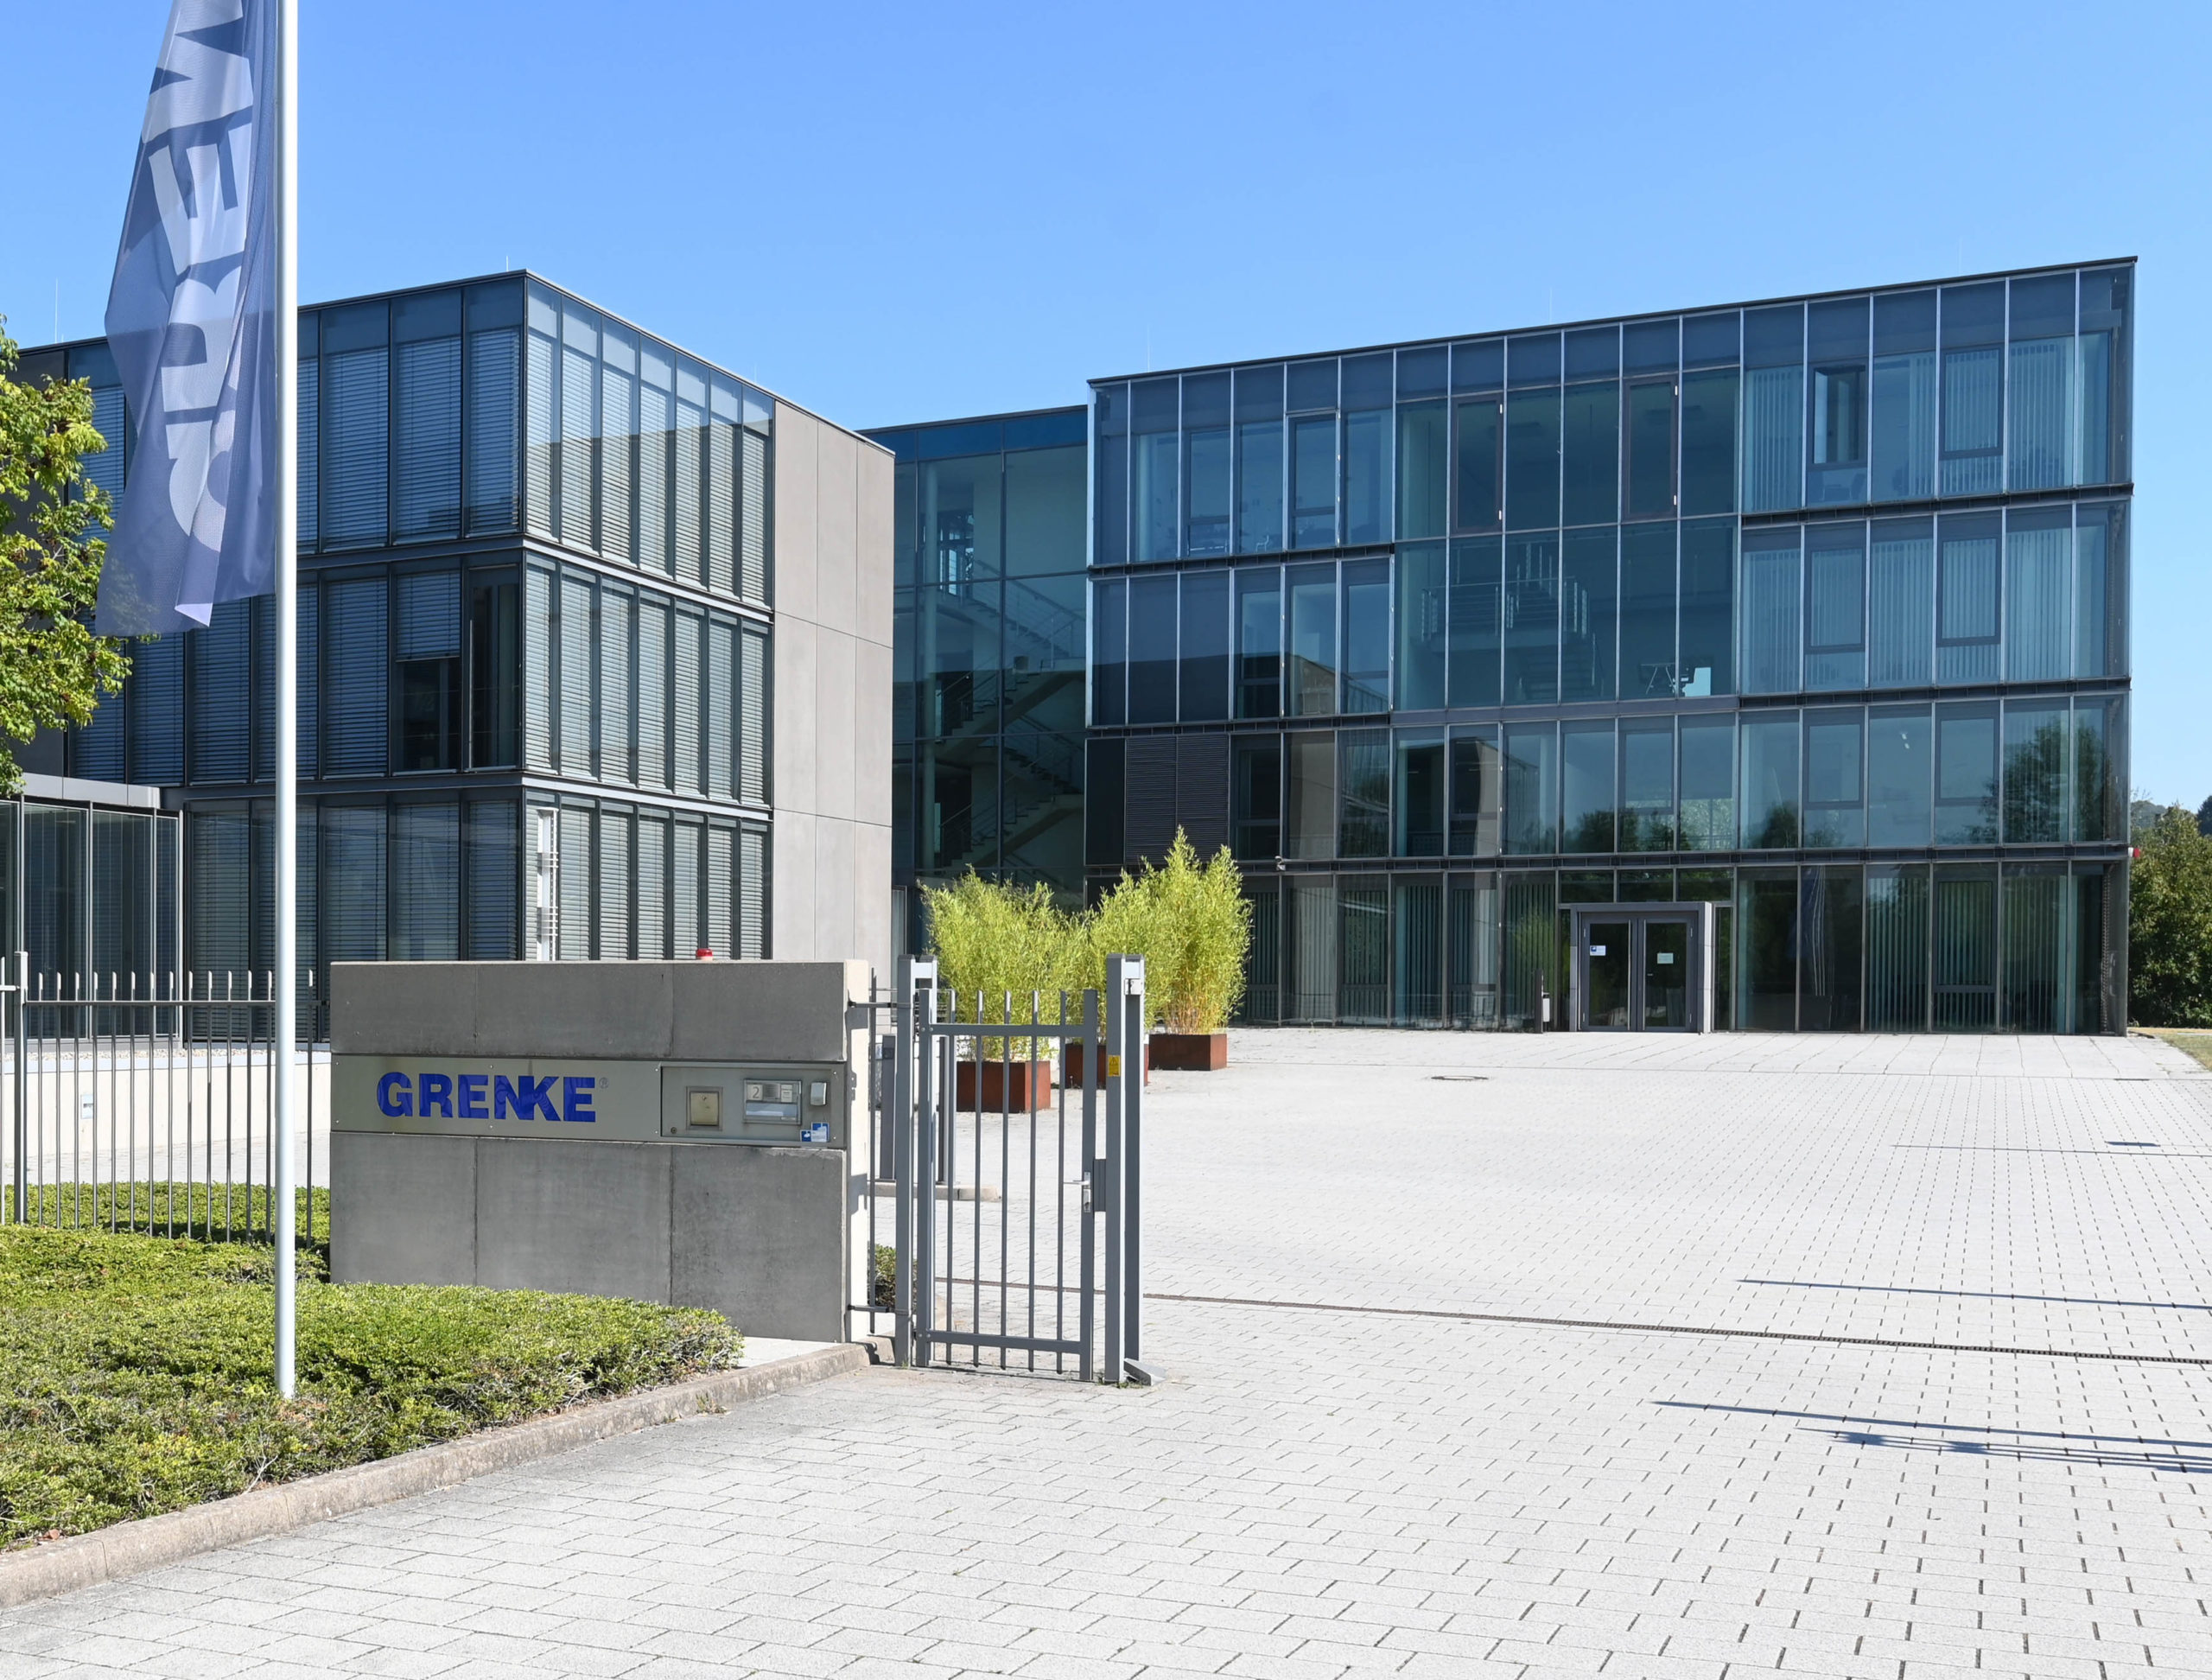 Grenke shares tank after quick vendor accuses it of fraud